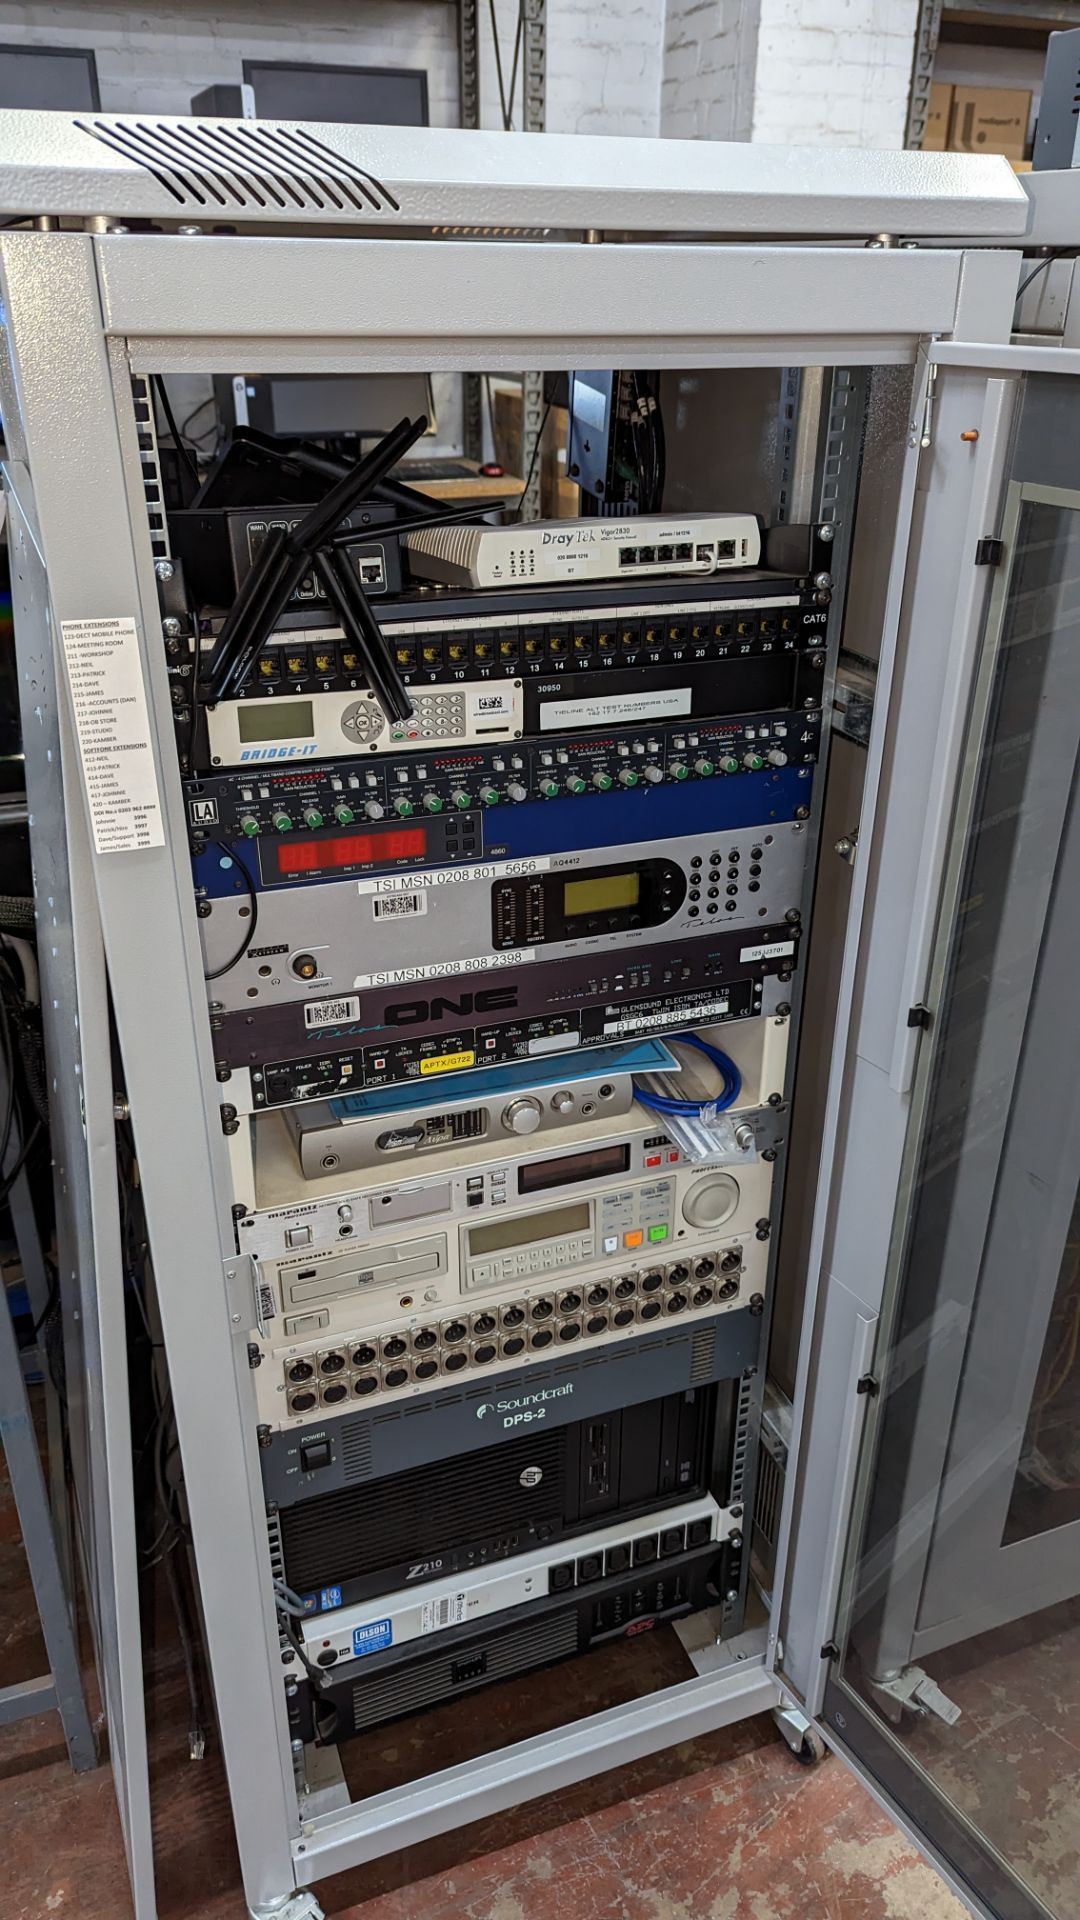 Rack mounted system and contents including Draytek modem, Vipronet wireless LAN, patch panel, Bridg- - Image 5 of 26